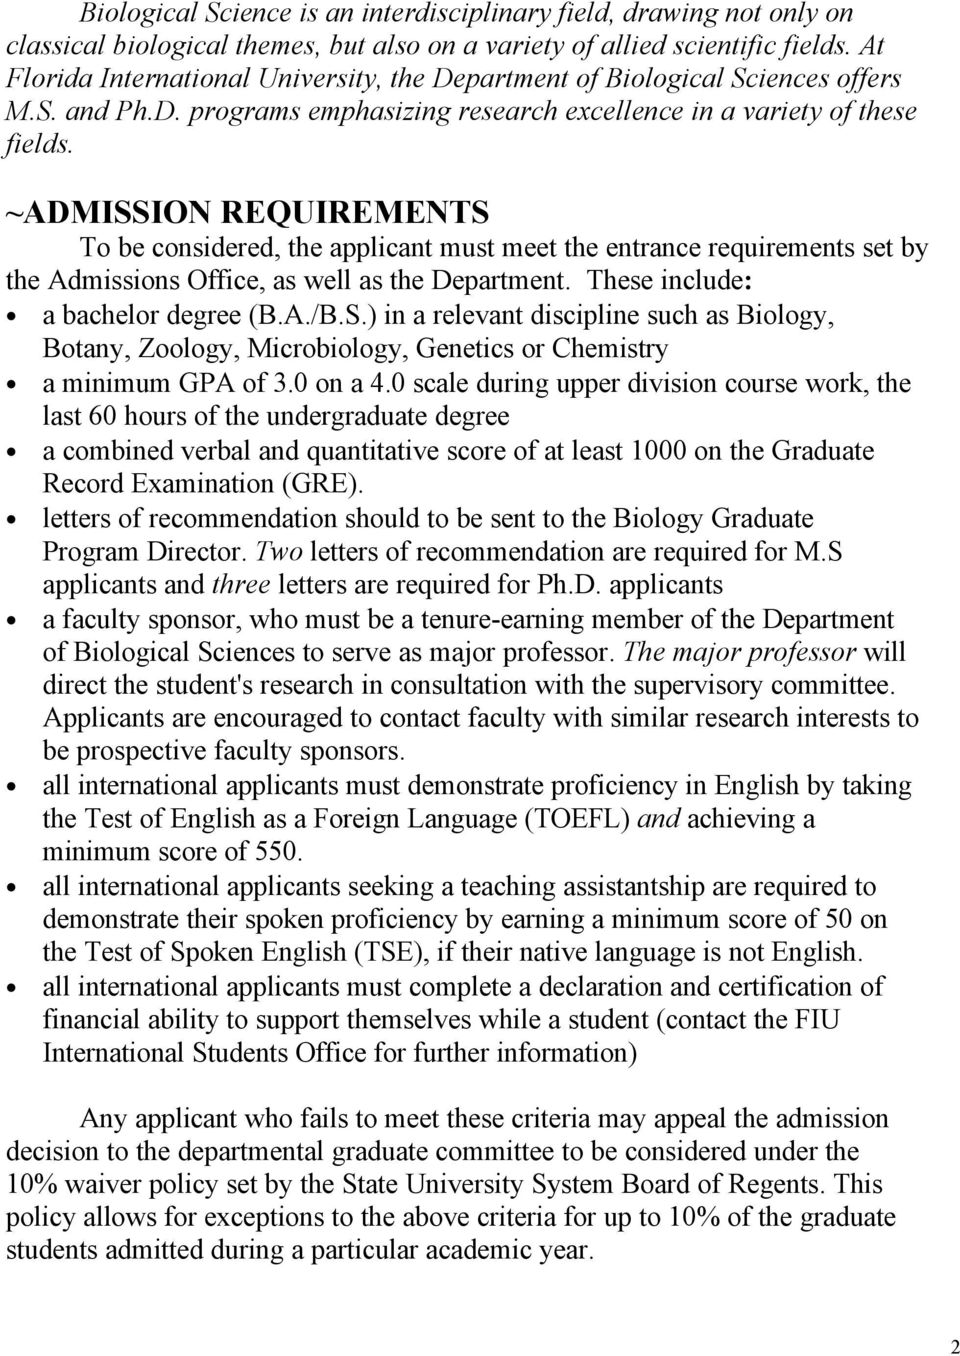 ~ADMISSION REQUIREMENTS To be considered, the applicant must meet the entrance requirements set by the Admissions Office, as well as the Department. These include: a bachelor degree (B.A./B.S.) in a relevant discipline such as Biology, Botany, Zoology, Microbiology, Genetics or Chemistry a minimum GPA of 3.